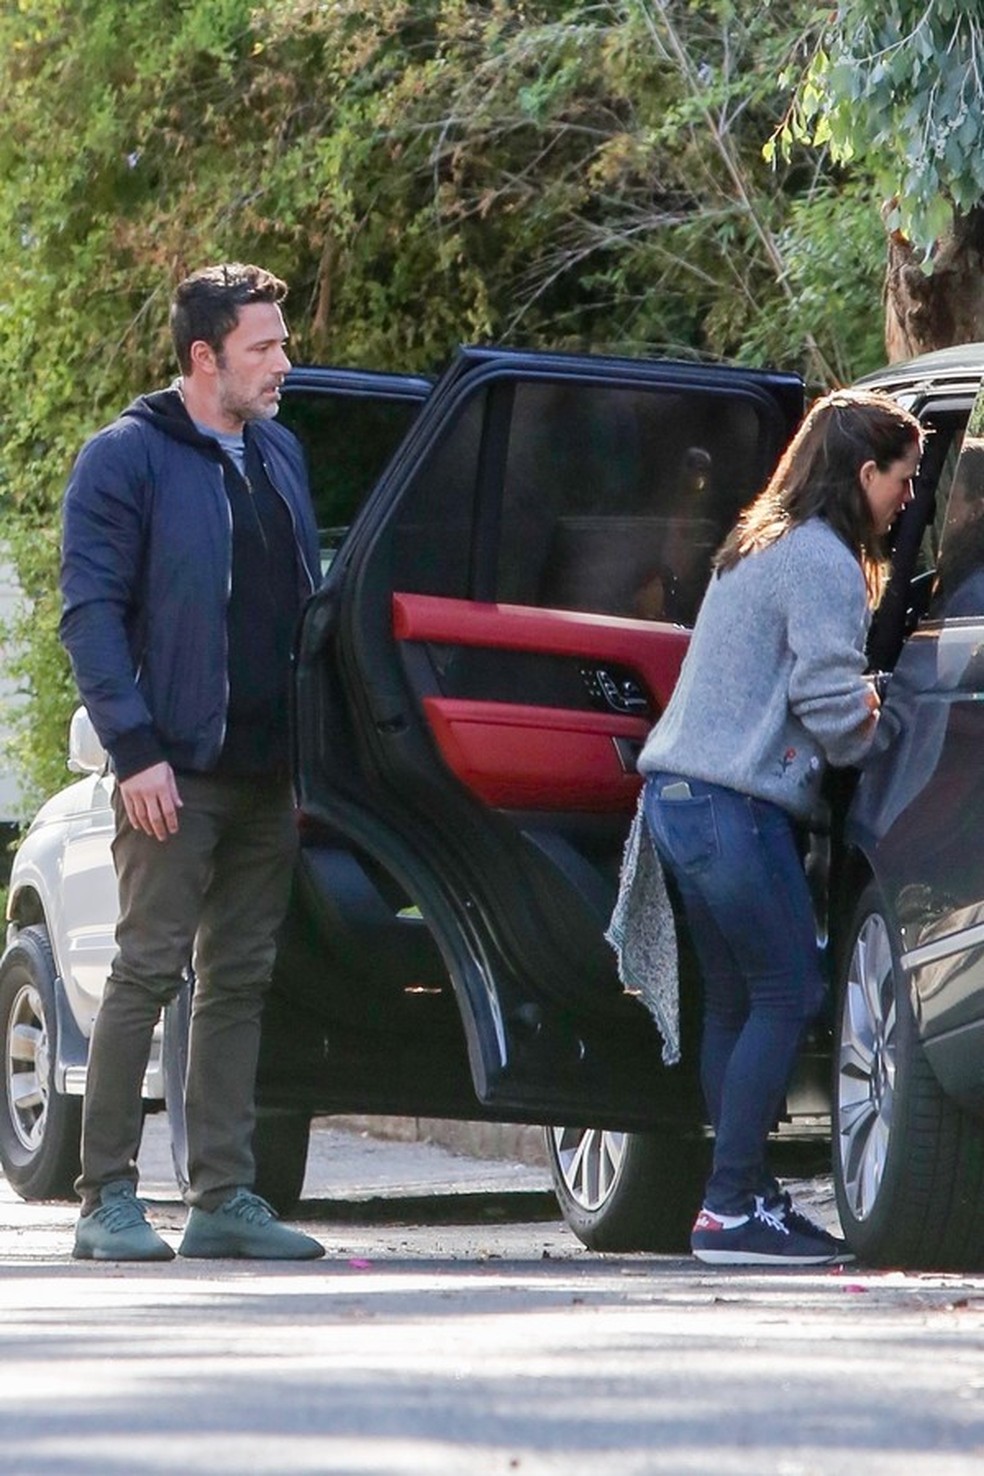 Brentwood, CA - *EXCLUSIVE* Ex's Ben Affleck and Jennifer Garner have a tense conversation outside her house. The former husband and wife drove away on Ben's Range Rover with Jen on the driver's seat while unhappy Ben hopped in on the passenger's seat. (Foto: BENS / BACKGRID) — Foto: Vogue